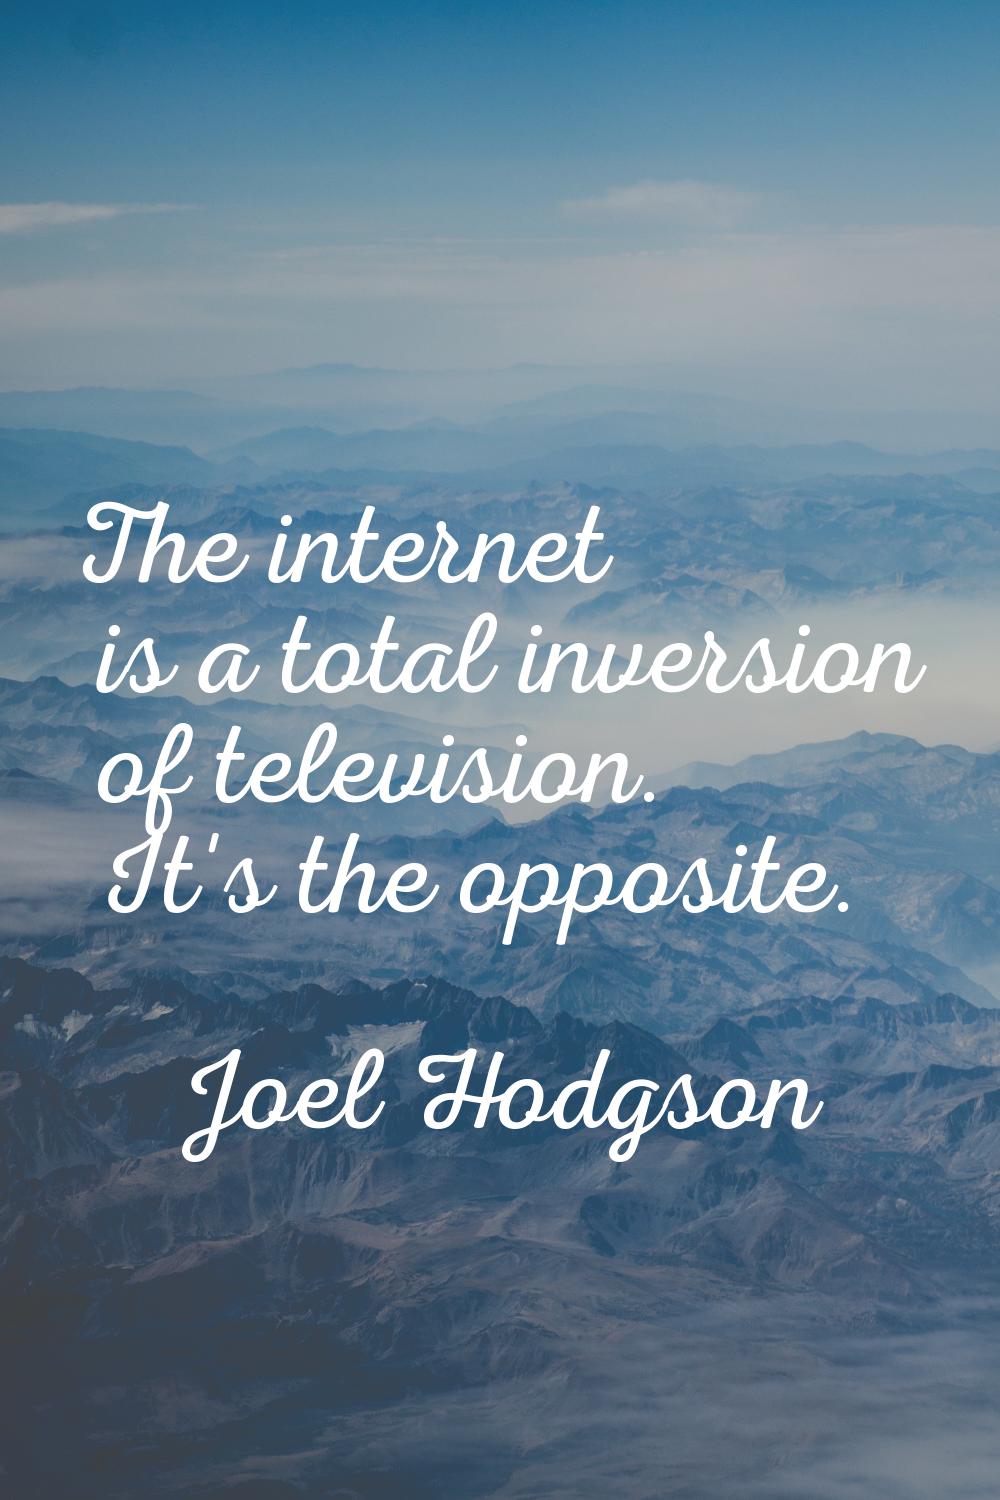 The internet is a total inversion of television. It's the opposite.